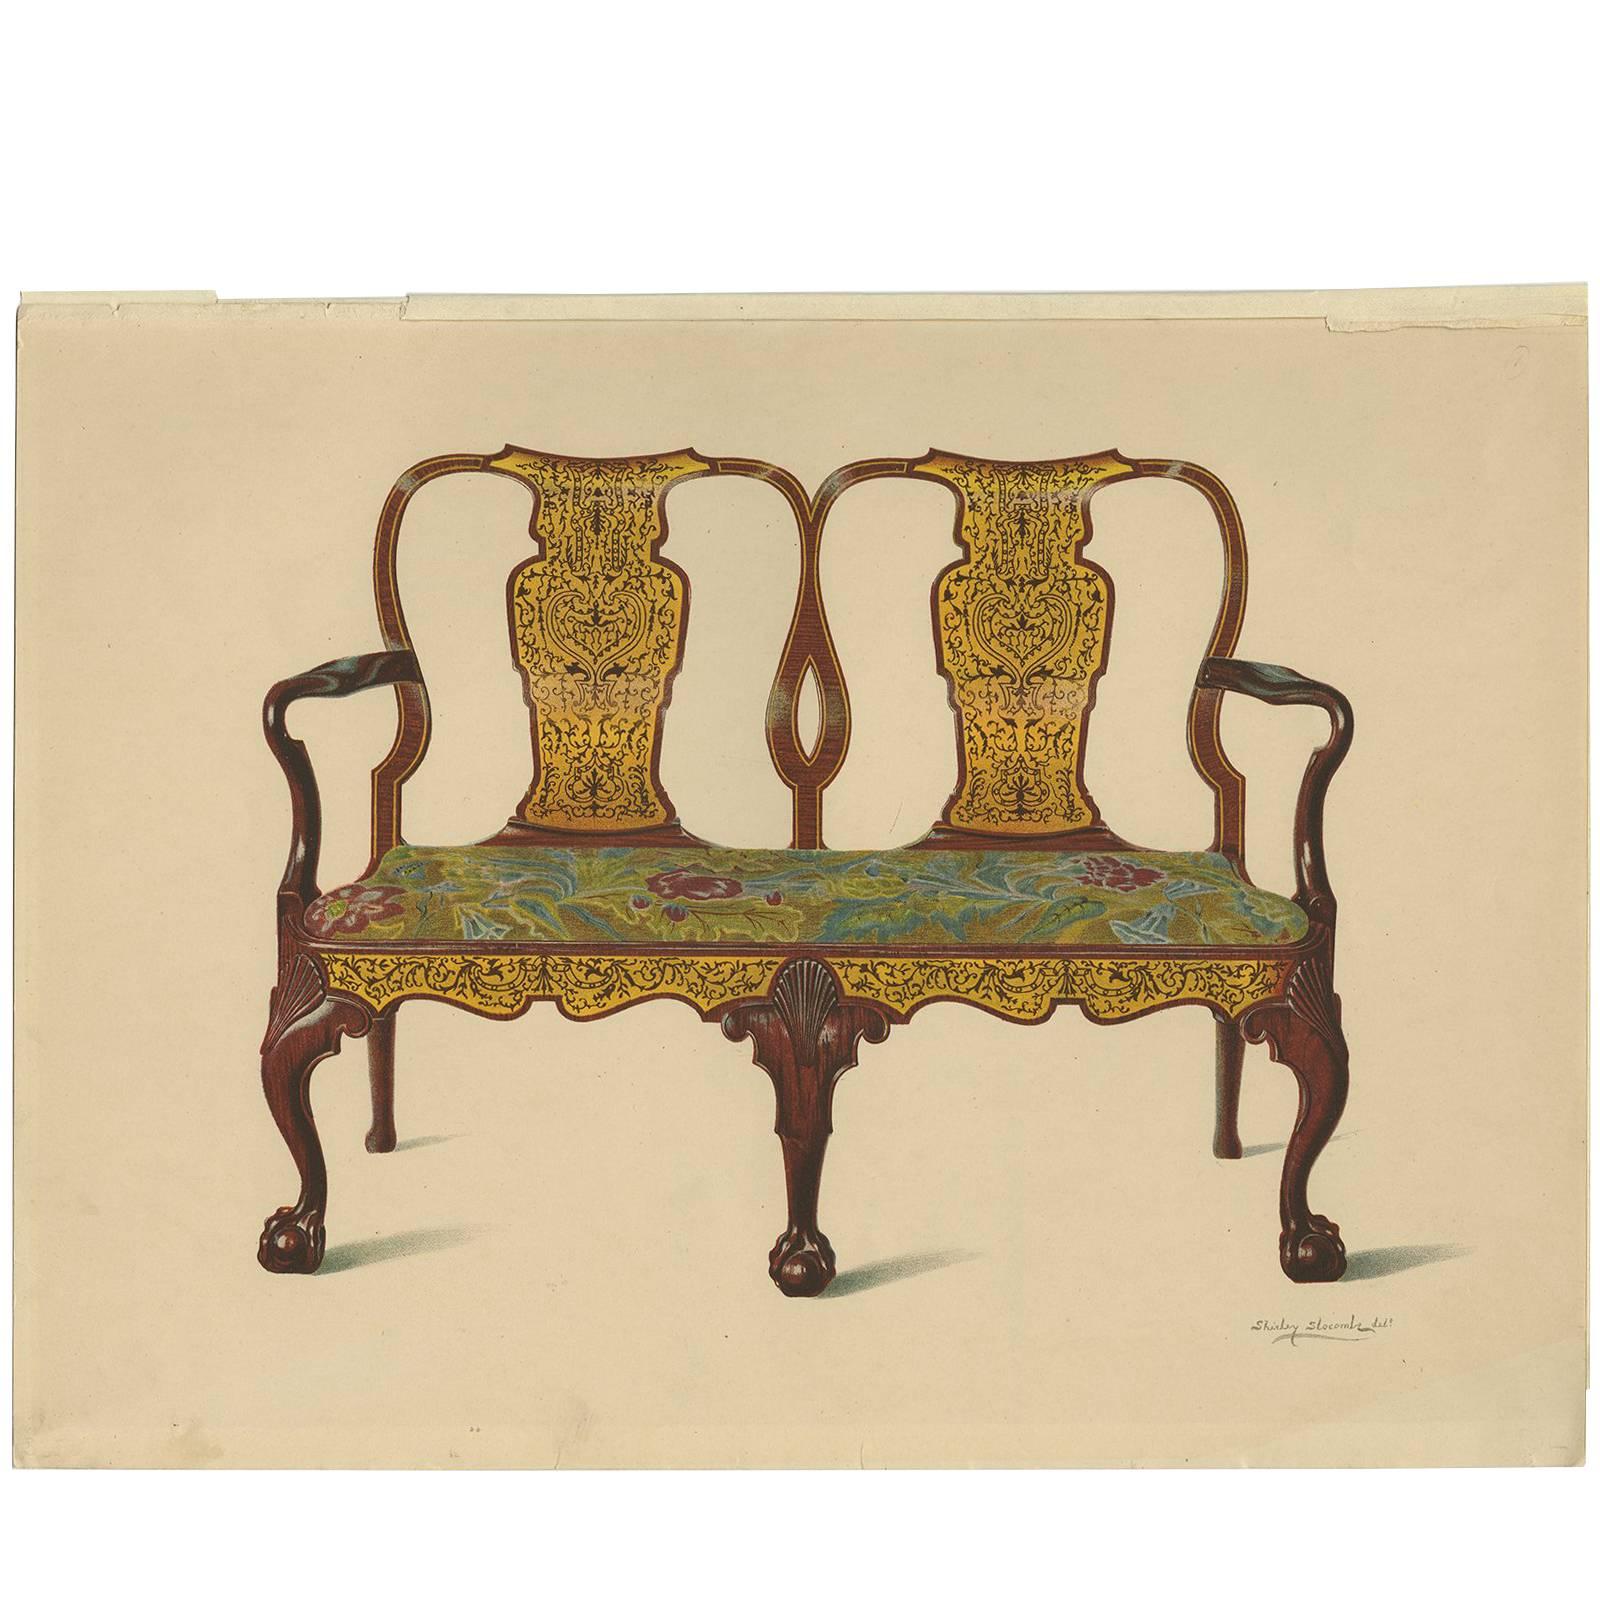 Antique Print English Furniture 'Walnut Settee' by P. Macquoid, 1906 For Sale